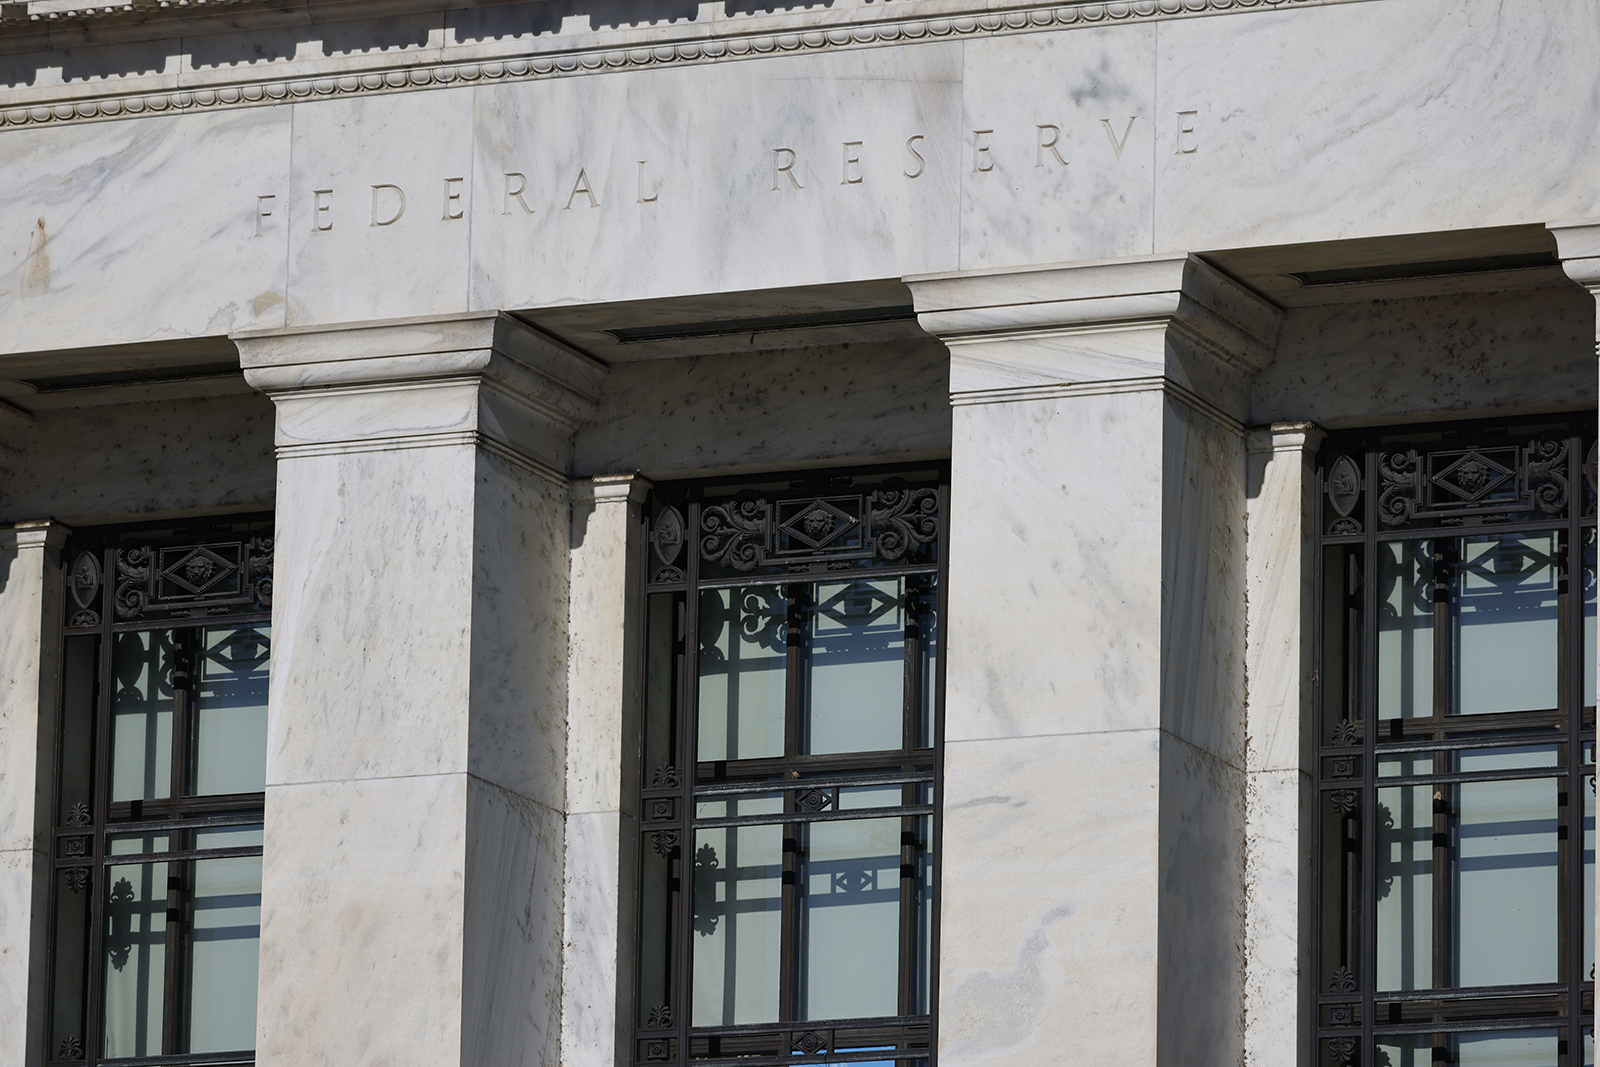 The Marriner S. Eccles Federal Reserve building in Washington, DC, in December 2022. 